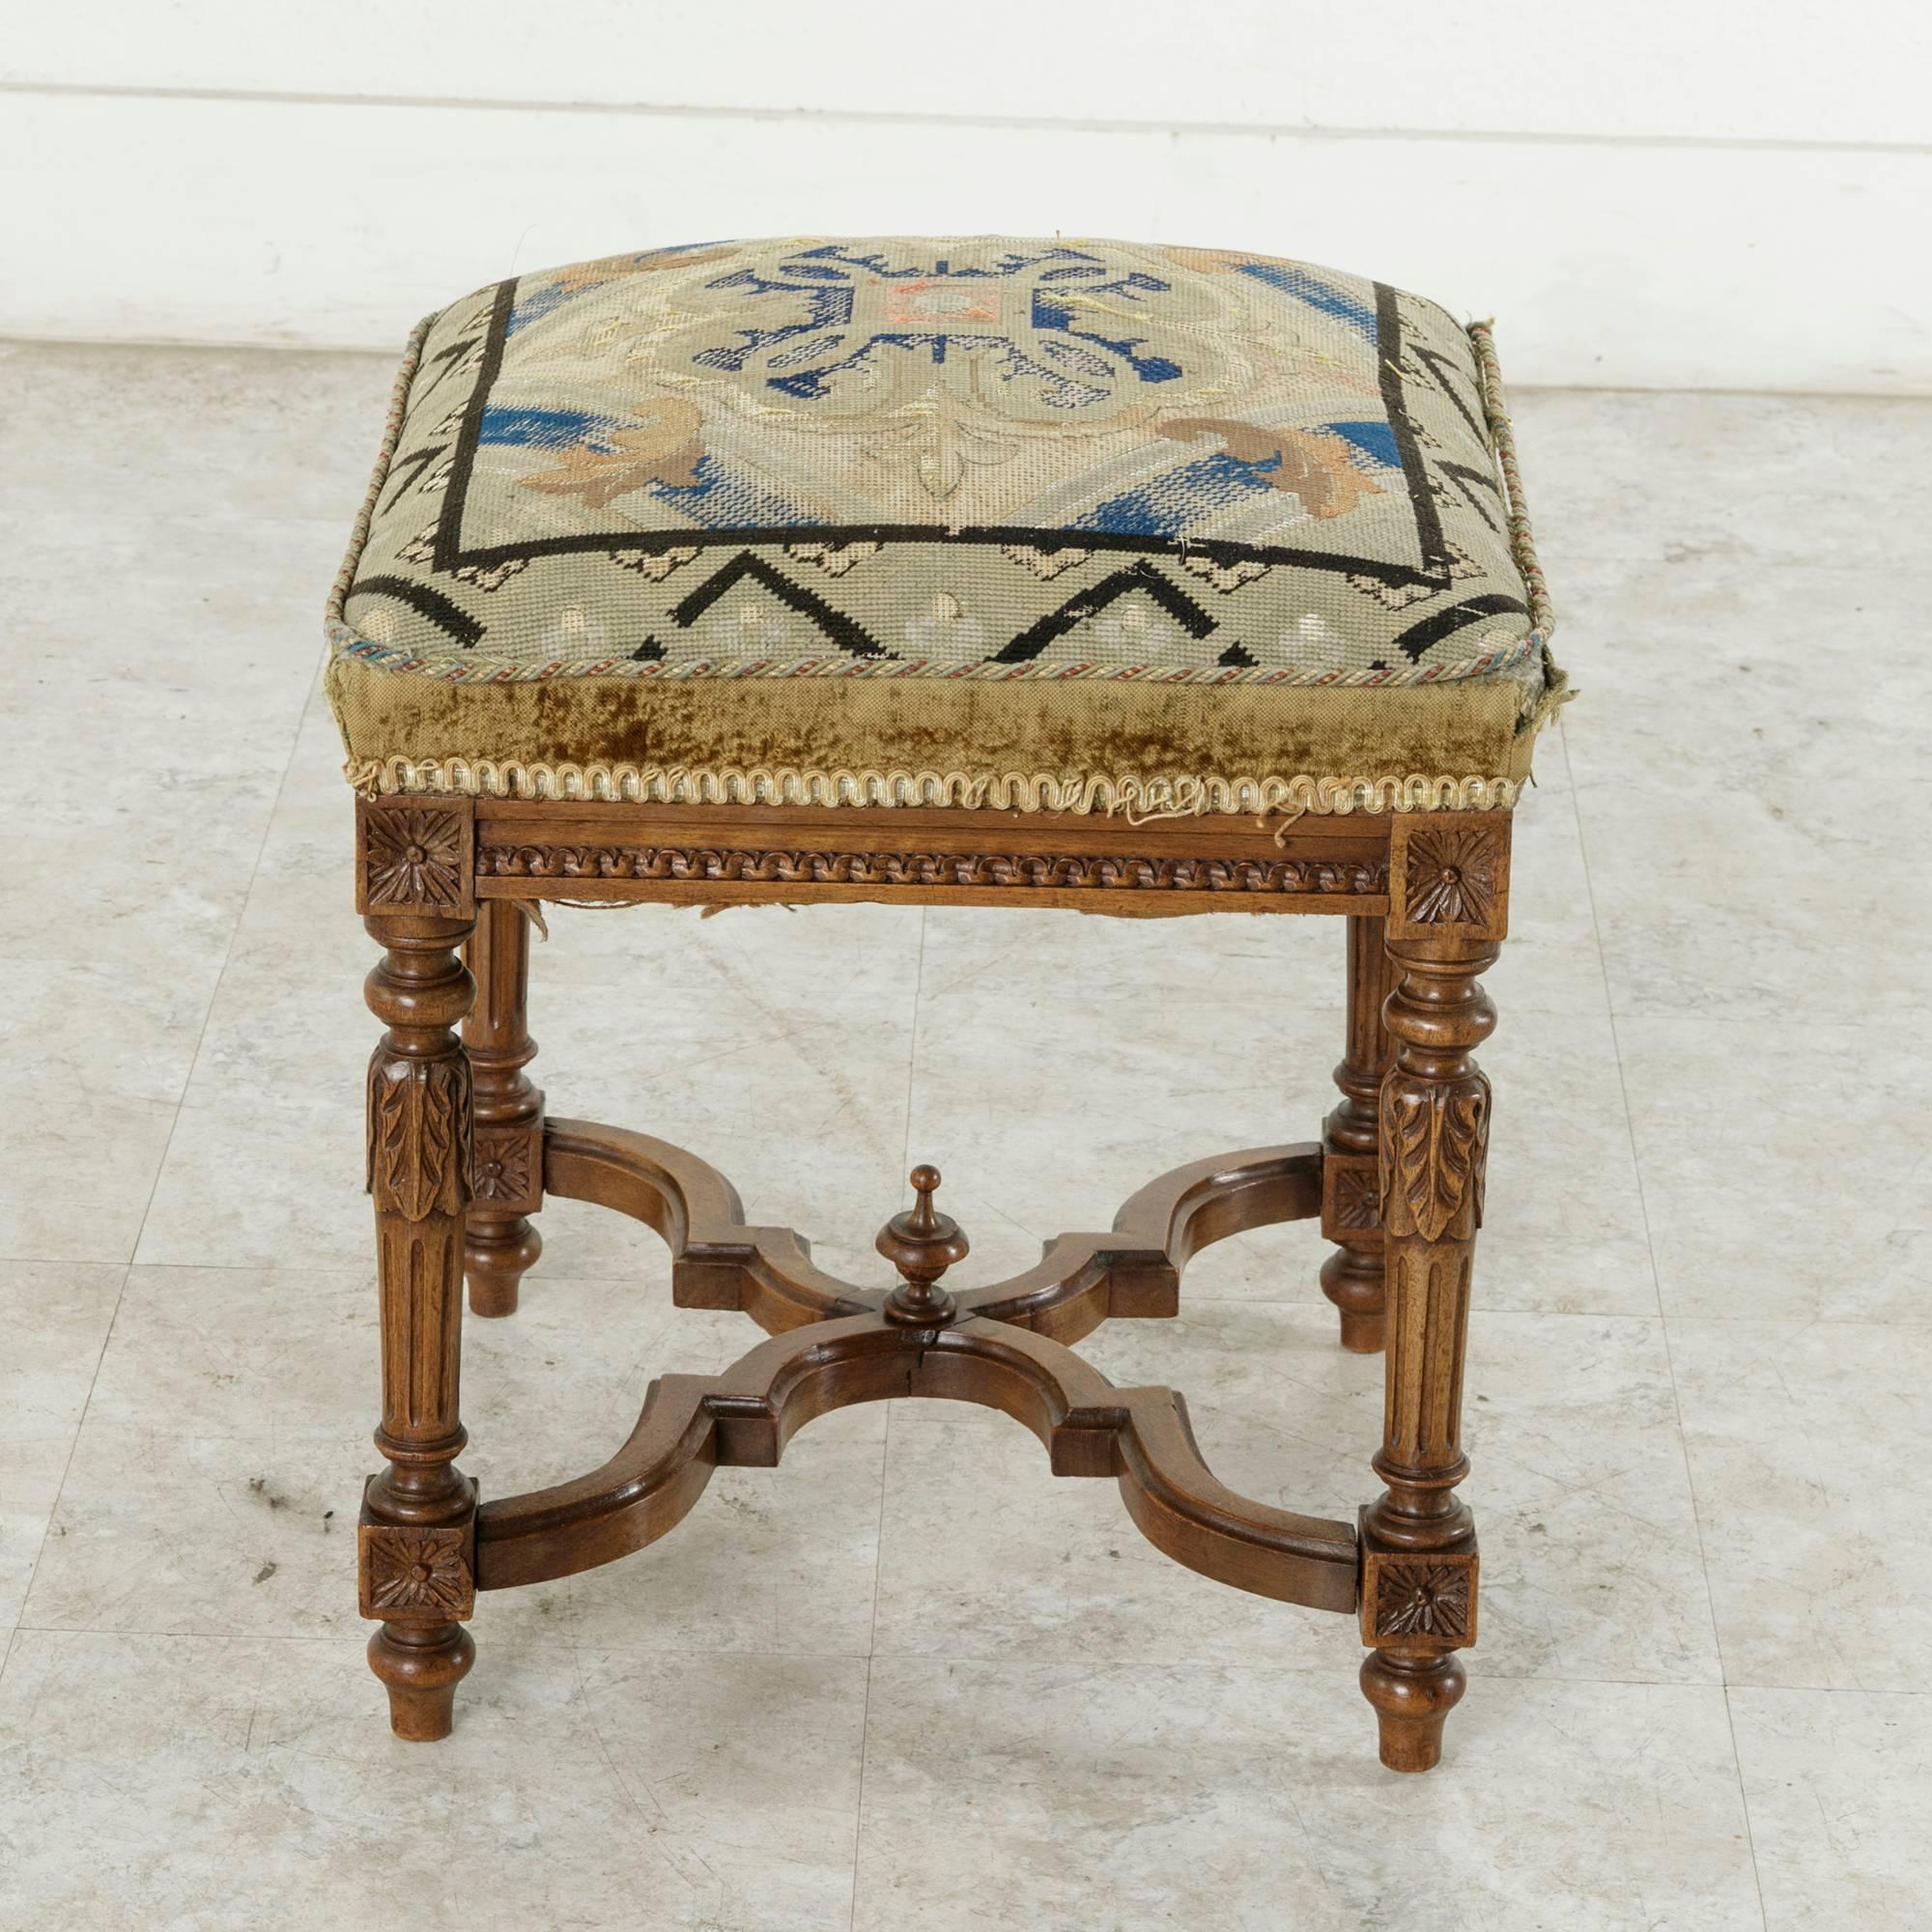 French 19th Century Hand-Carved Walnut Louis XVI Style Vanity Stool with Needlepoint